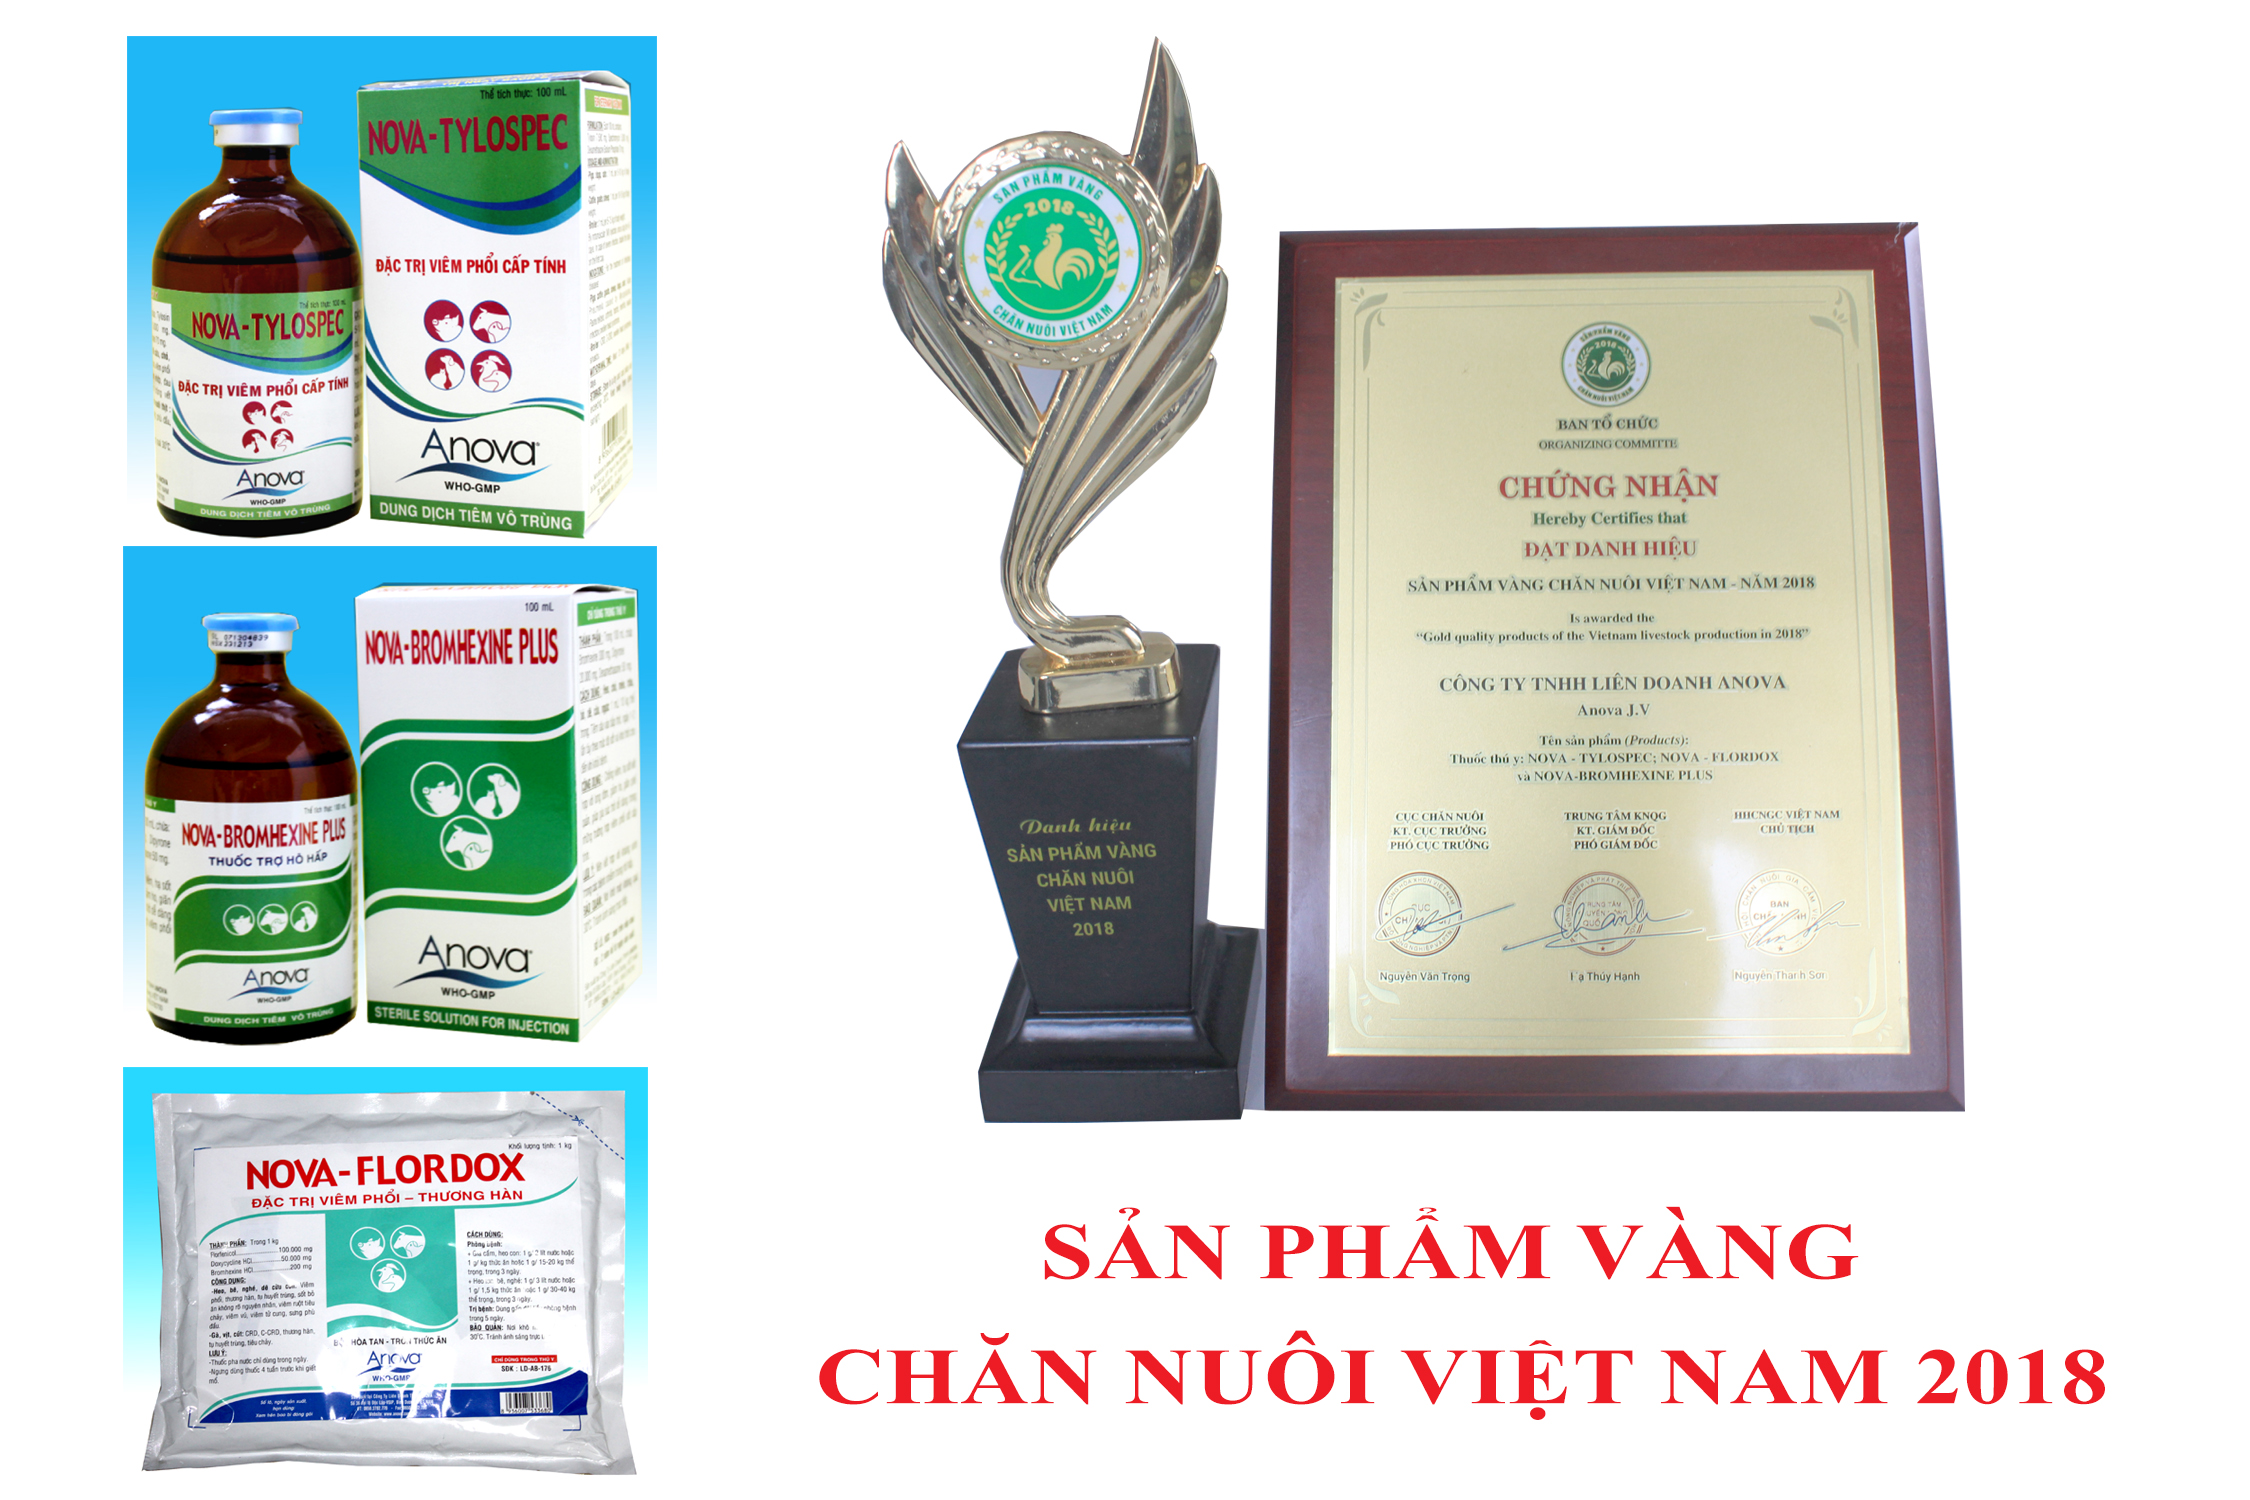 ANOVA RECEIVED THE CERTIFICATE OF " GOLD PRODUCT LIVESTOCK VIETNAM 2018".